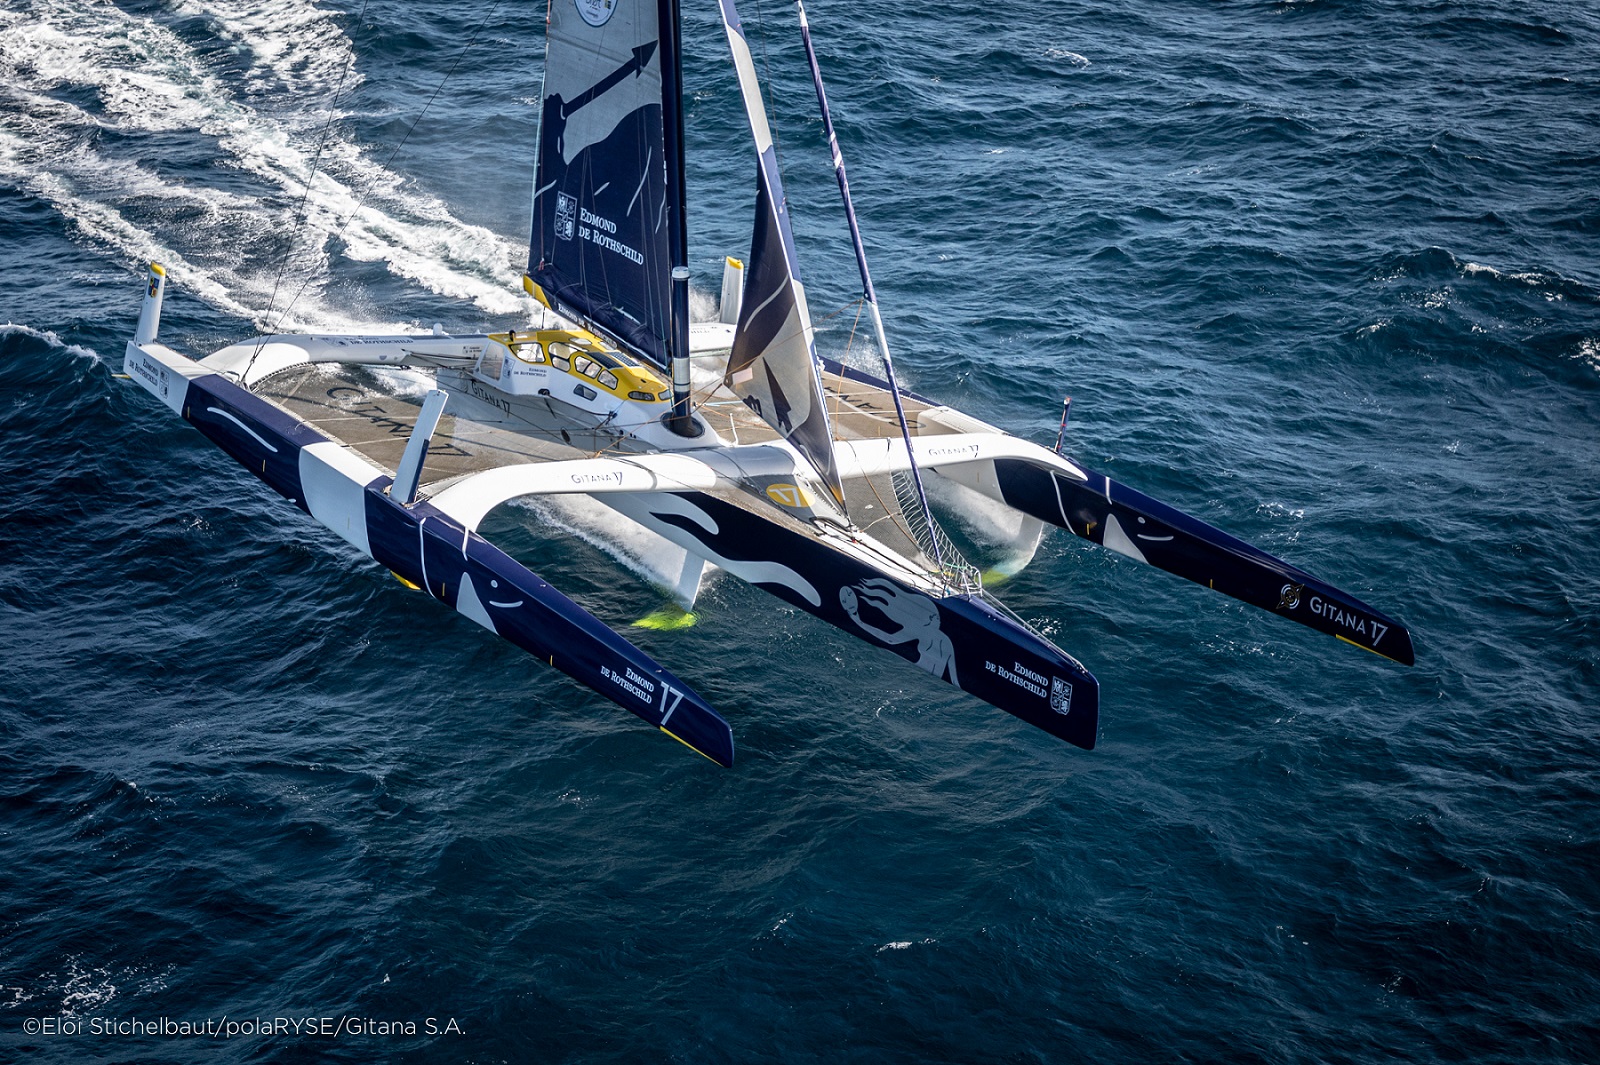 Team Gitana on Maxi Edmond de Rothschild saw an end of their Jules Verne Trophy record attempt earlier this year following damage to their rudder but are back to defend their multihull title in this August's Rolex Fastnet Race © Eloi Stichelbaut - polaRYSE / Gitana S.A.